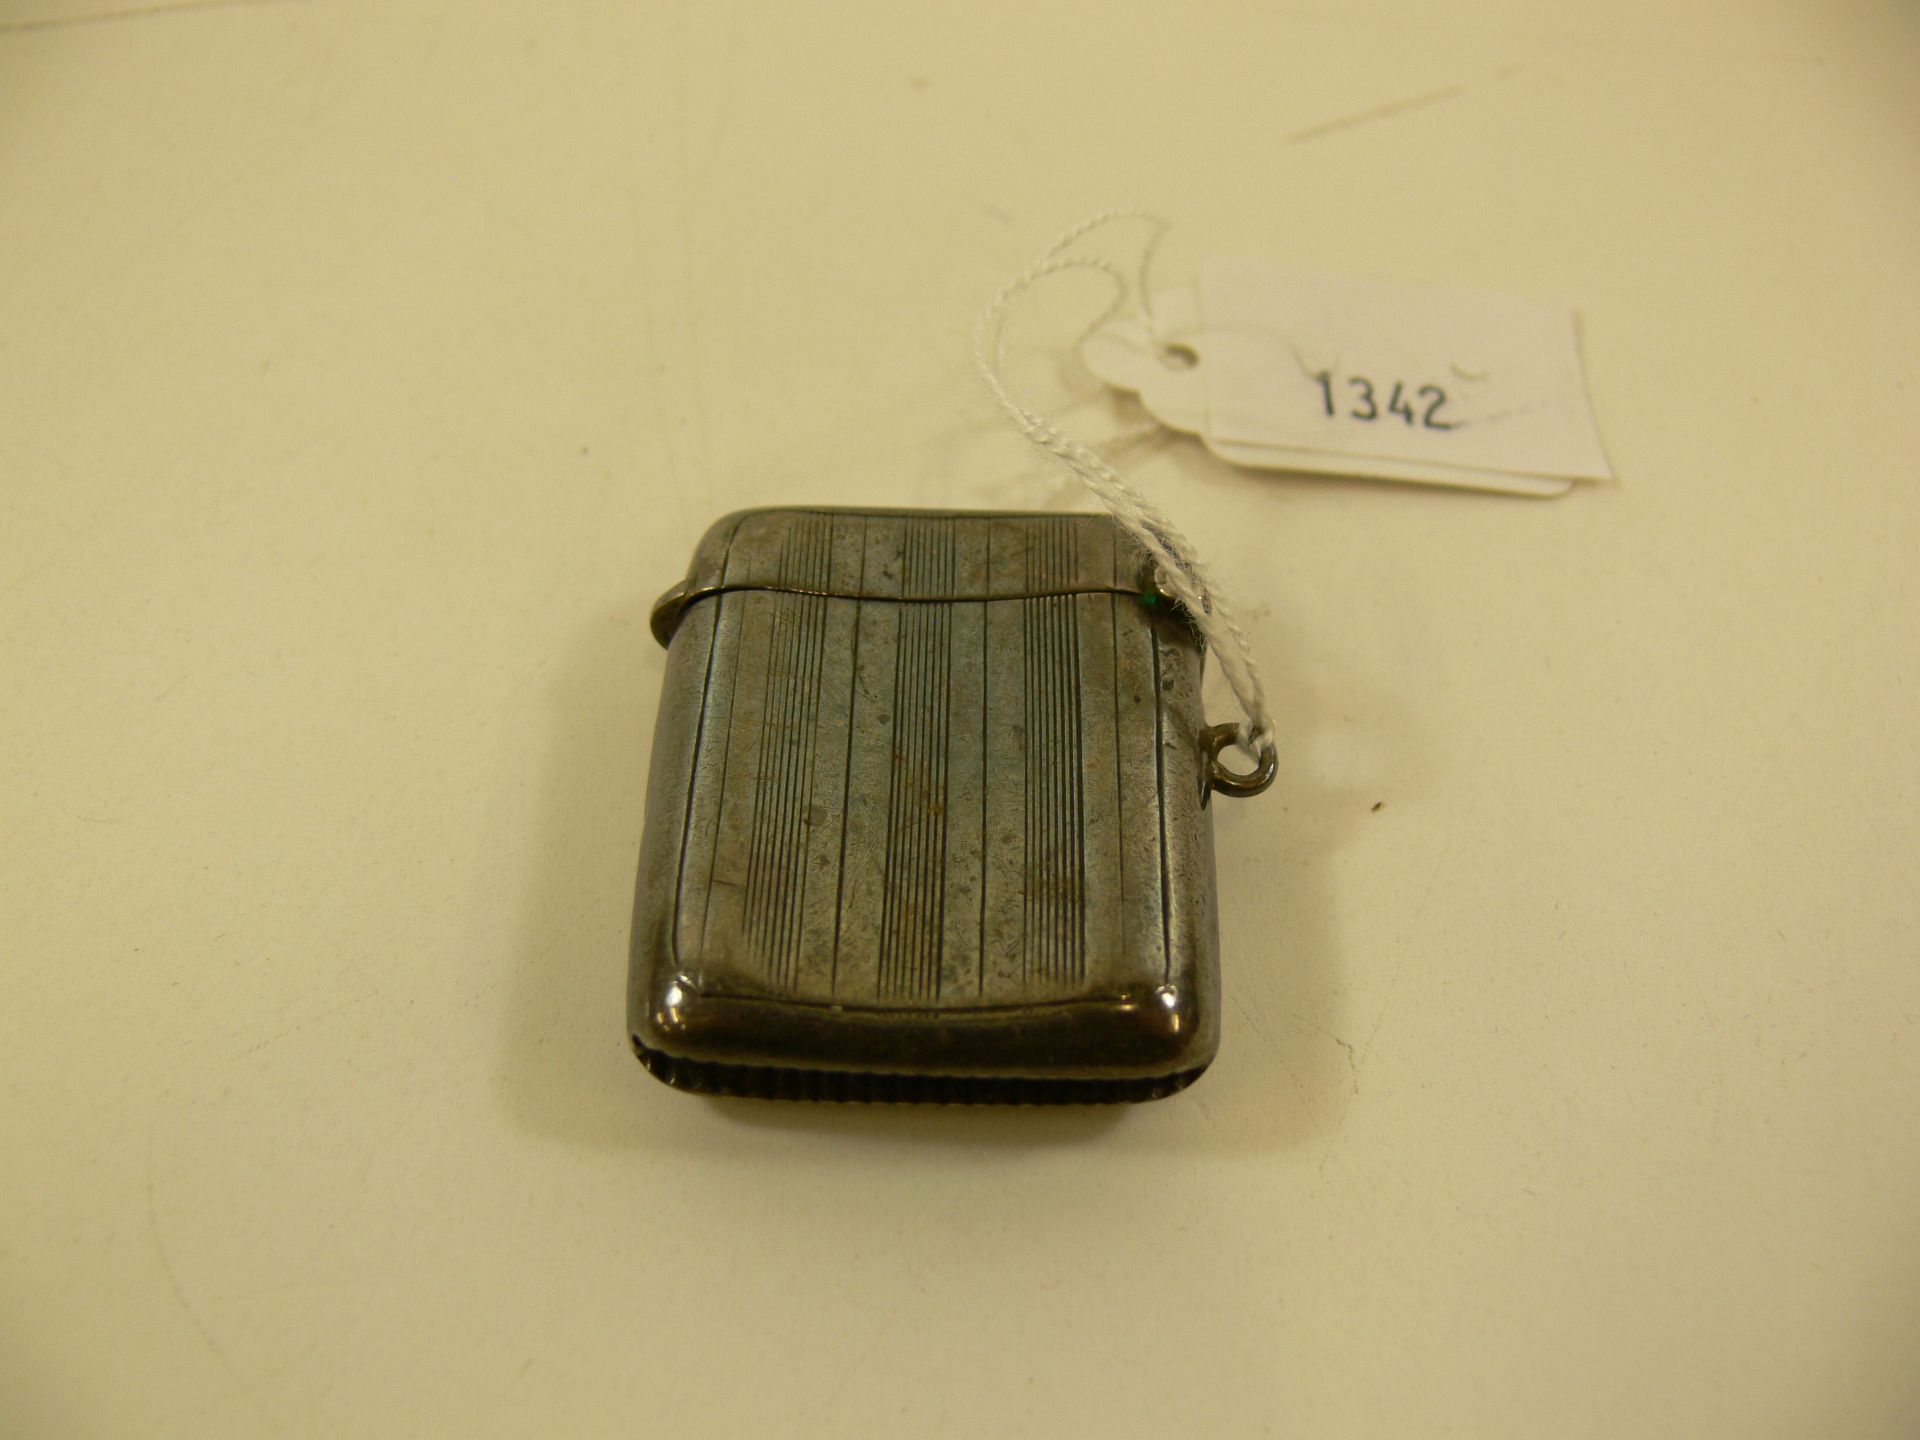 A hallmarked silver match holder (approx 20g) (est £20-£40) - Image 2 of 3